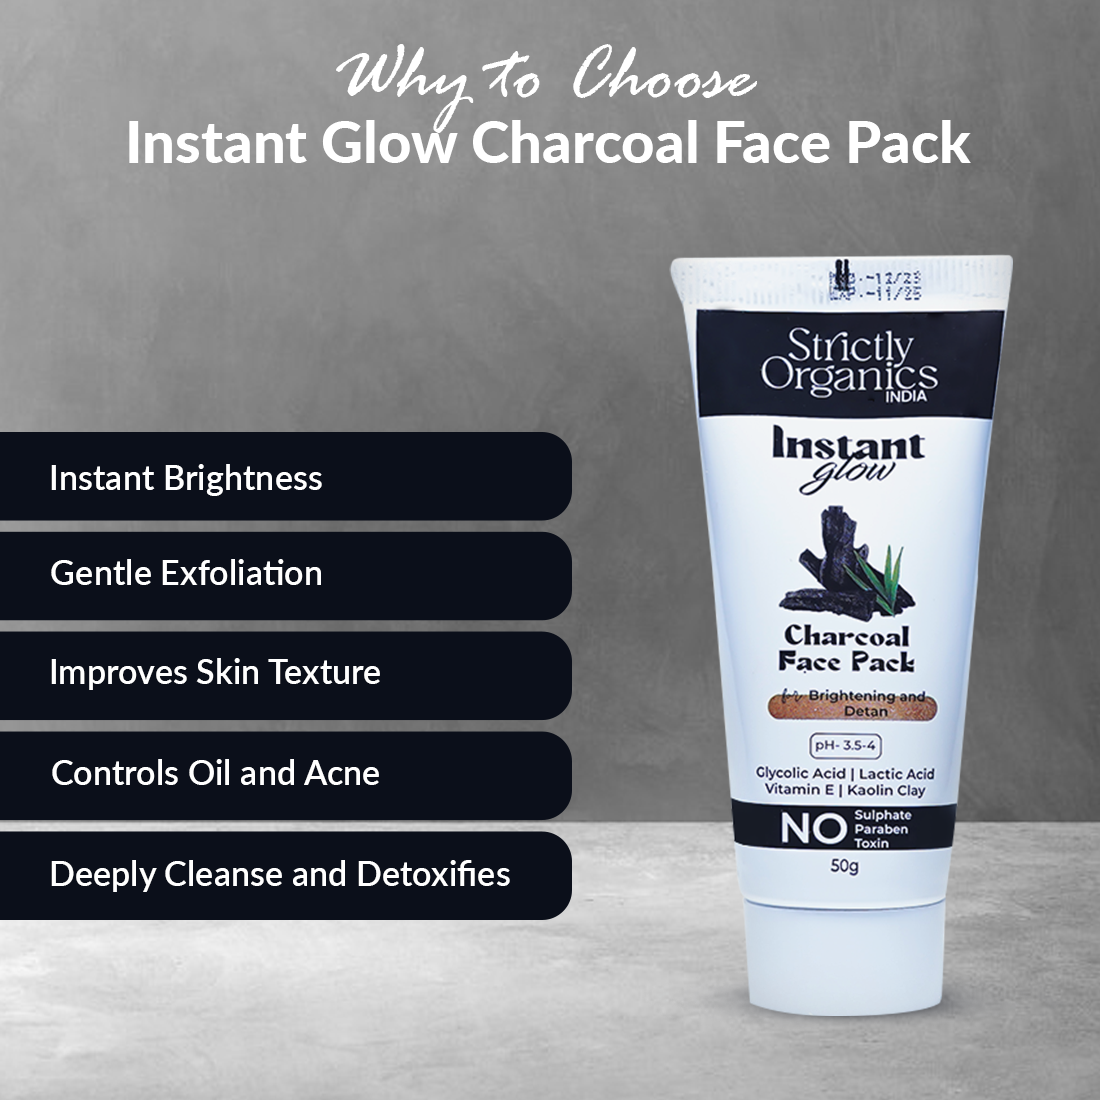 benefits of using Instant glow charcoal afce pack with glycolic acid, lactic acid, vitamin E- Strictly organics